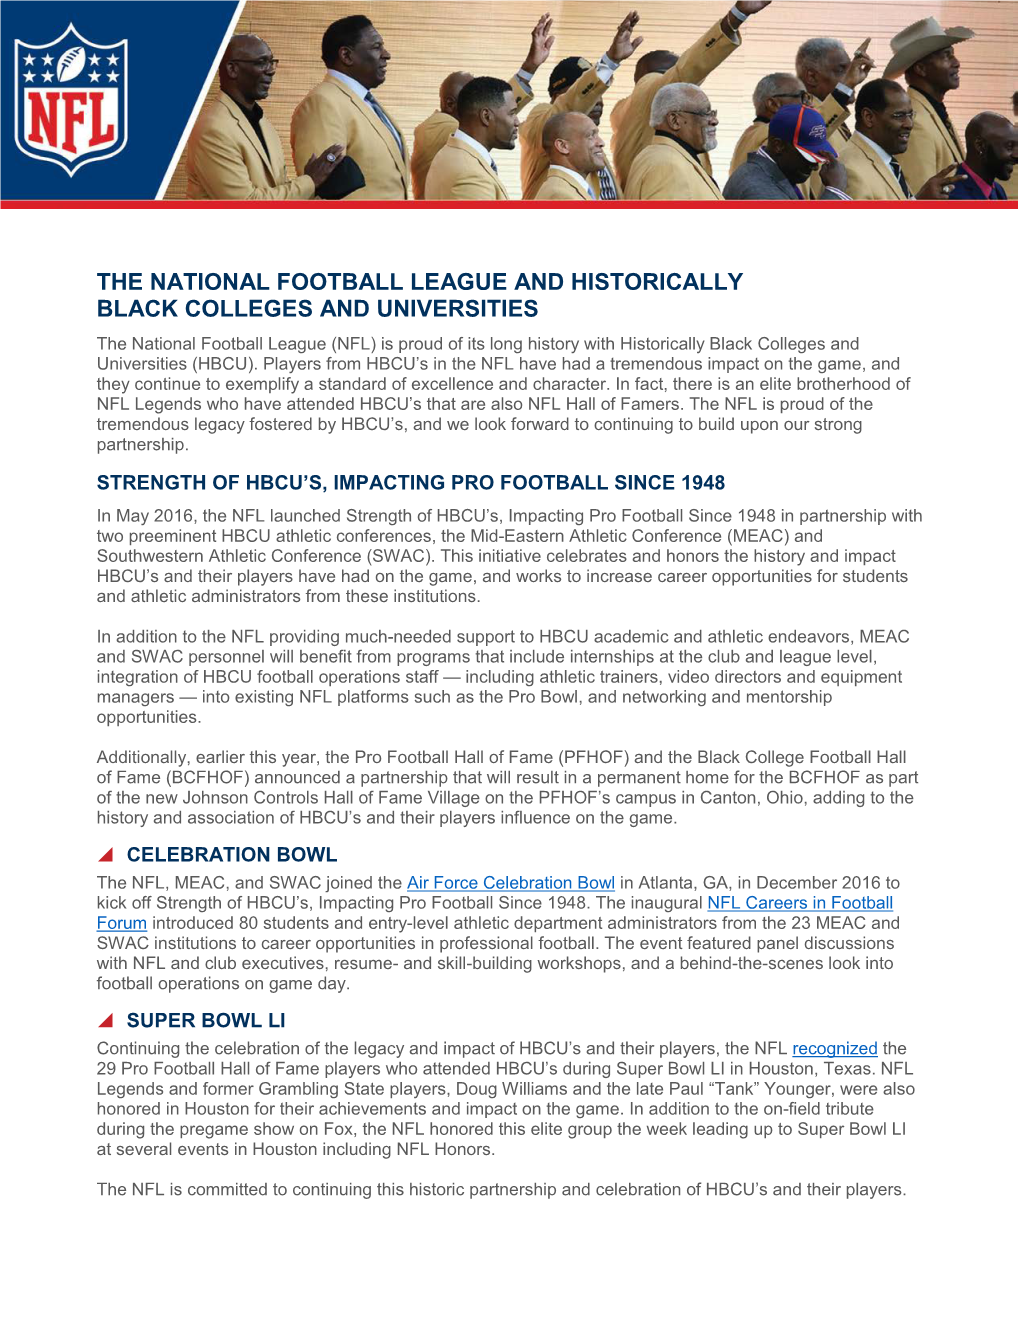 The National Football League and Historically Black Colleges and Universities